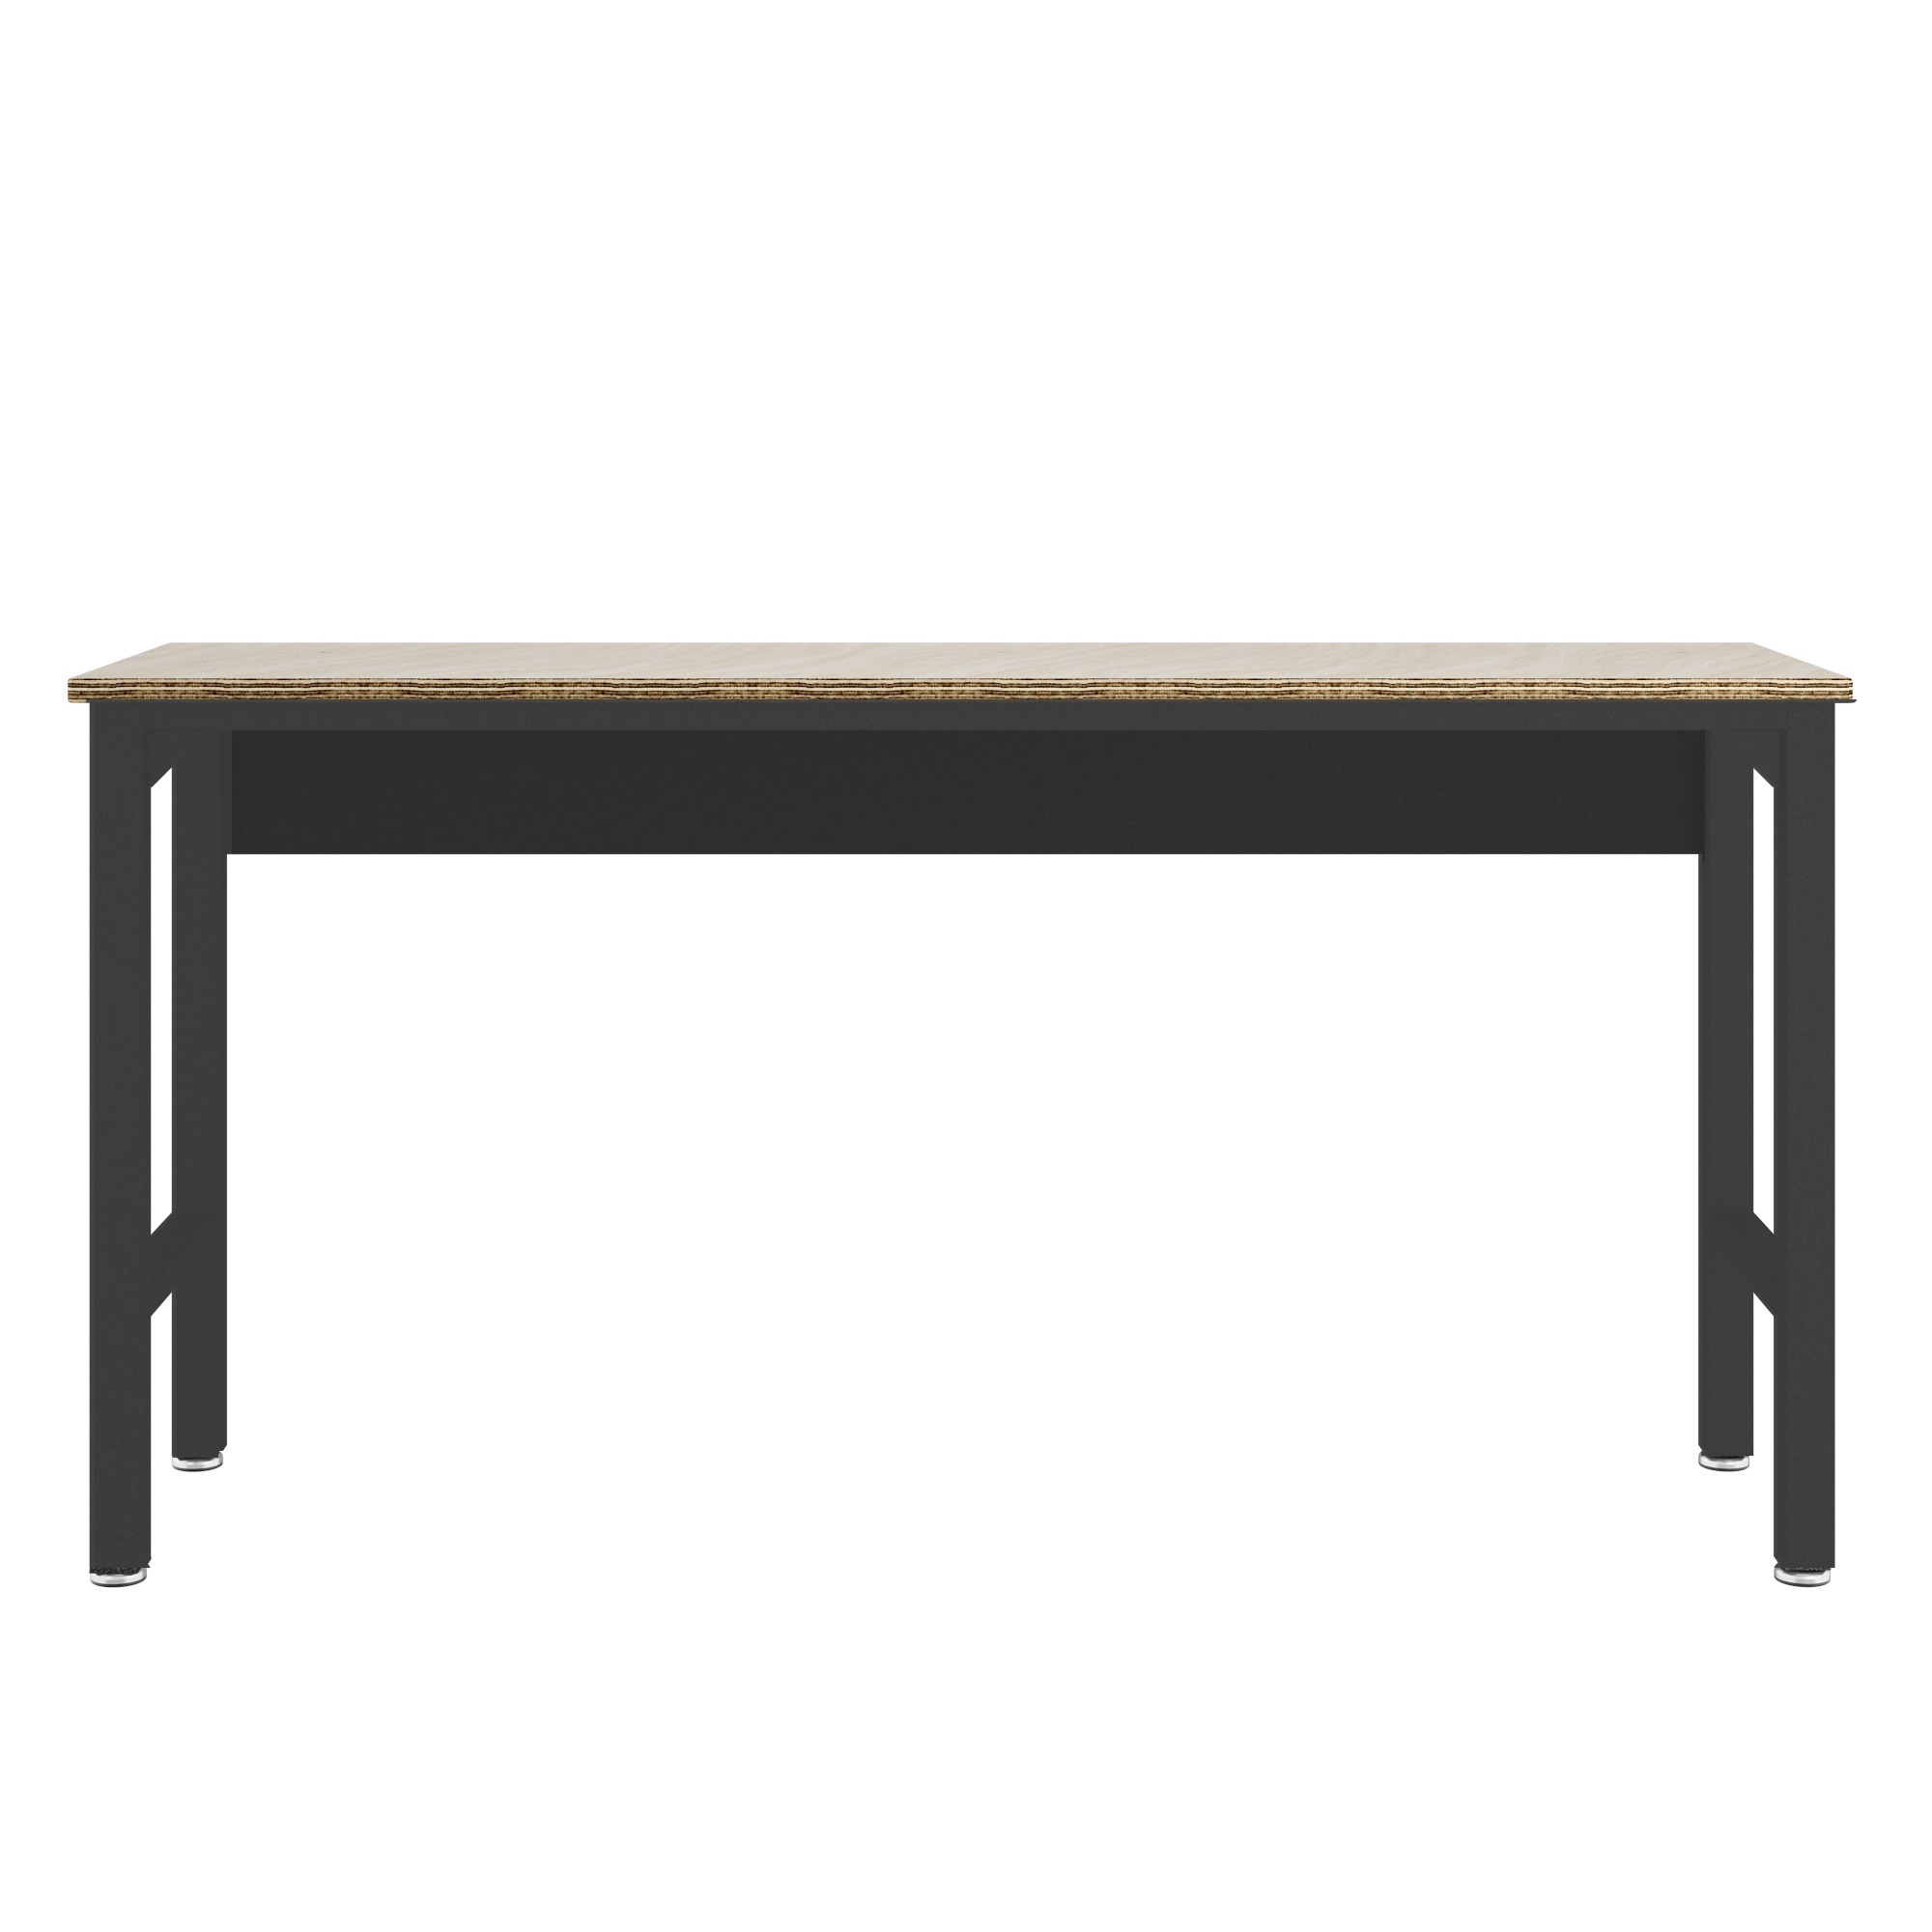 Manhattan Comfort, Fortress Wood and Steel Garage Table in Charcoal, Width 72.4 in, Height 37.6 in, Depth 20.5 in, Model 6GMC